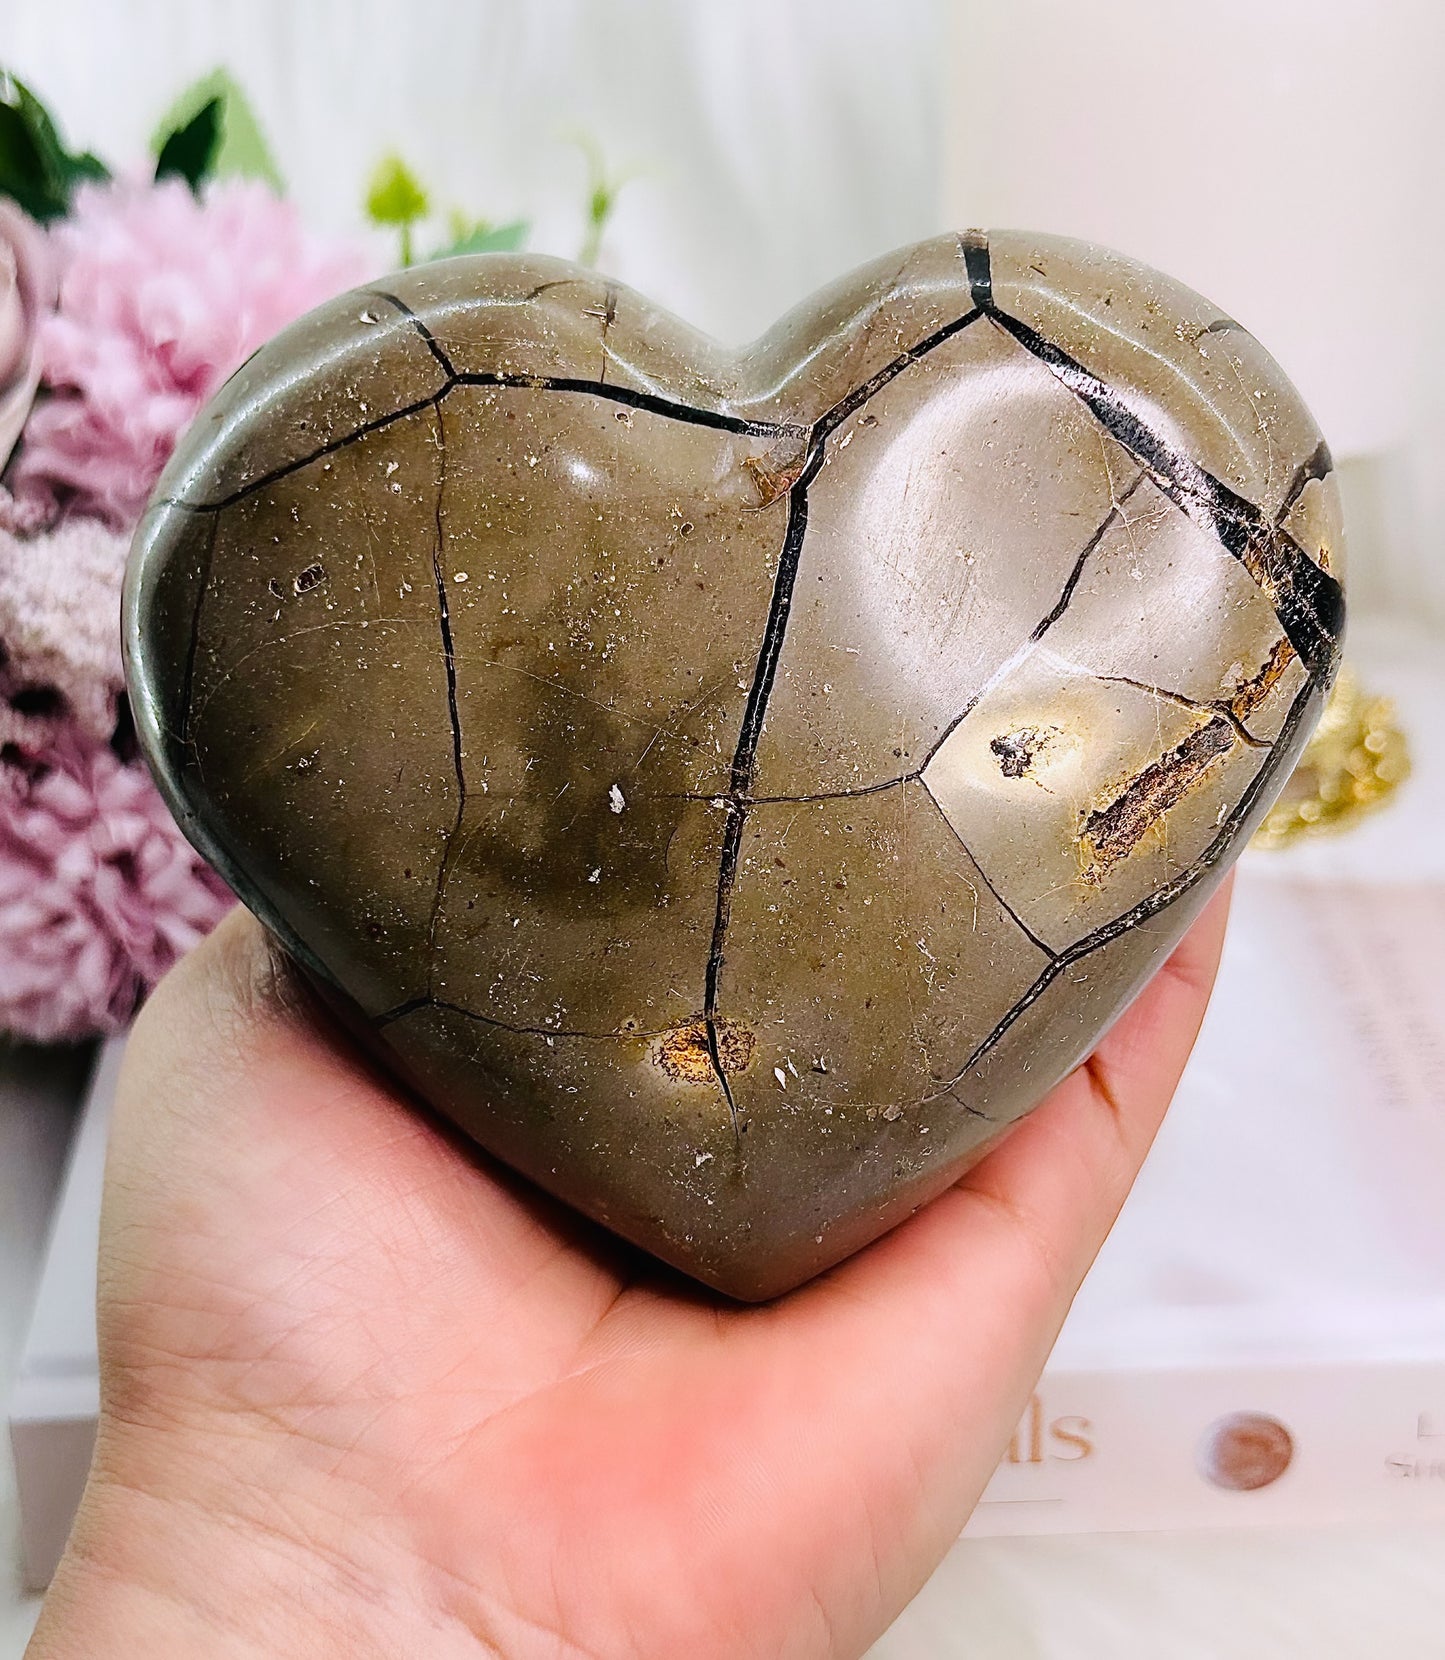 ⚜️ SALE ⚜️ A Nourishing & Calming Stone ~ Gorgeous Large 843gram Chunky Septarian Heart Carving